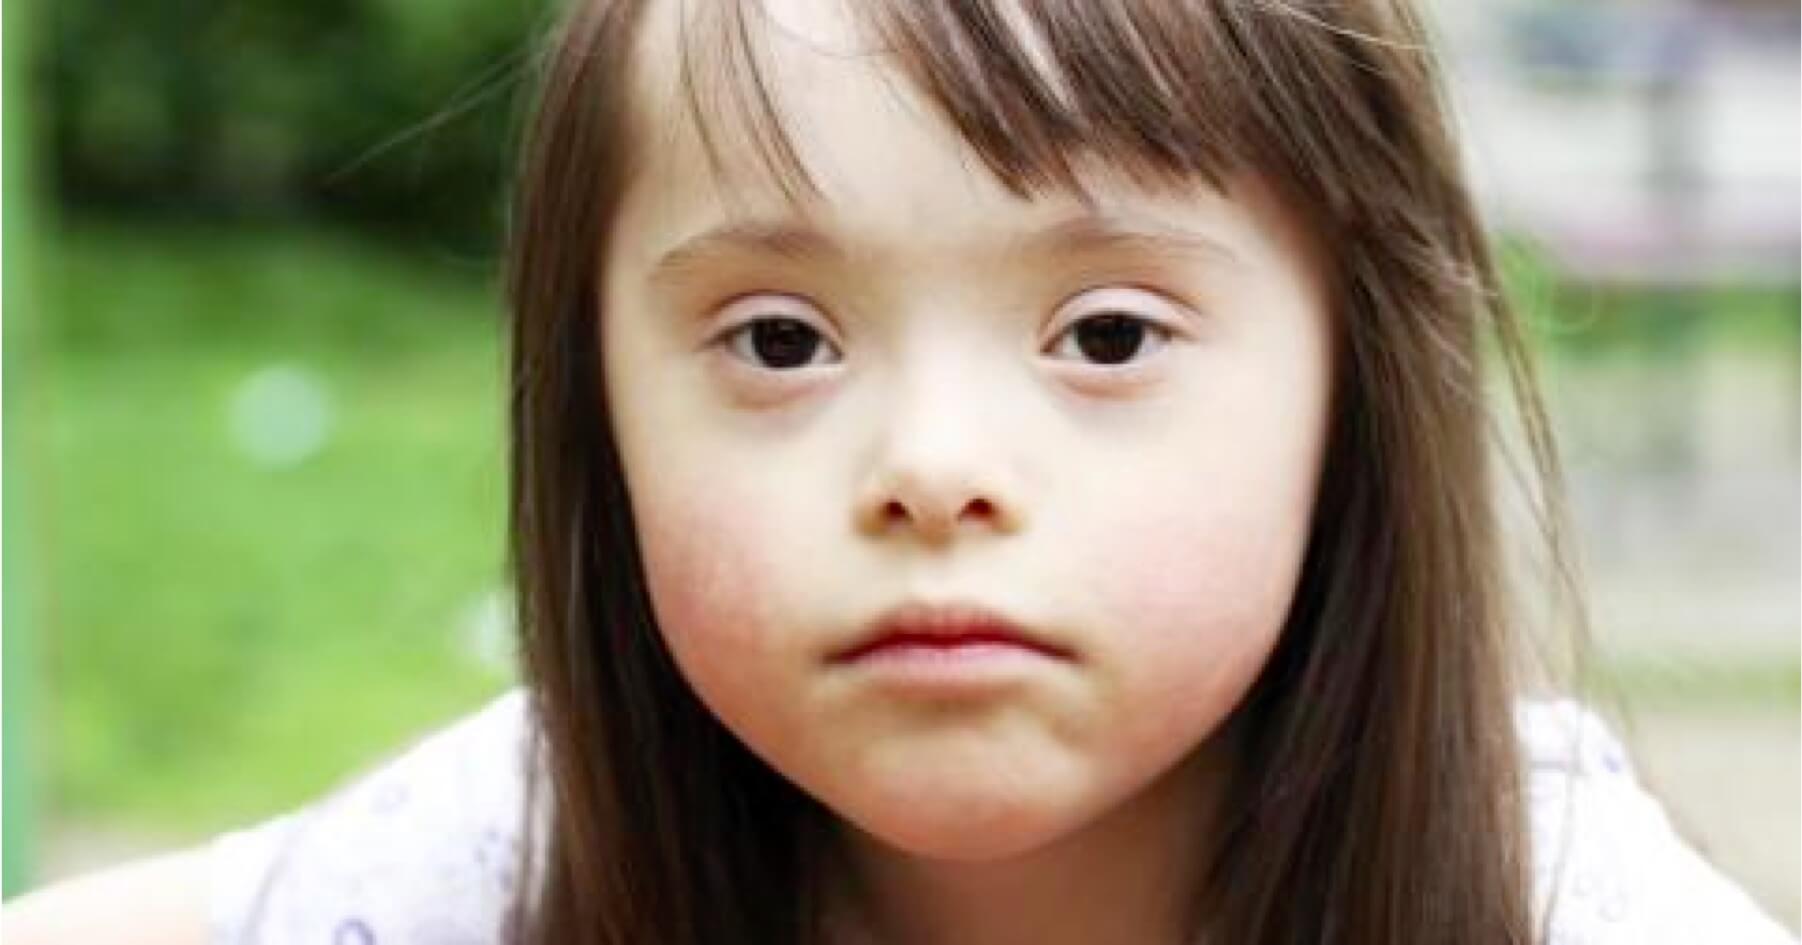 Govt going ahead with Down’s syndrome screening rollout despite likely increase in abortions